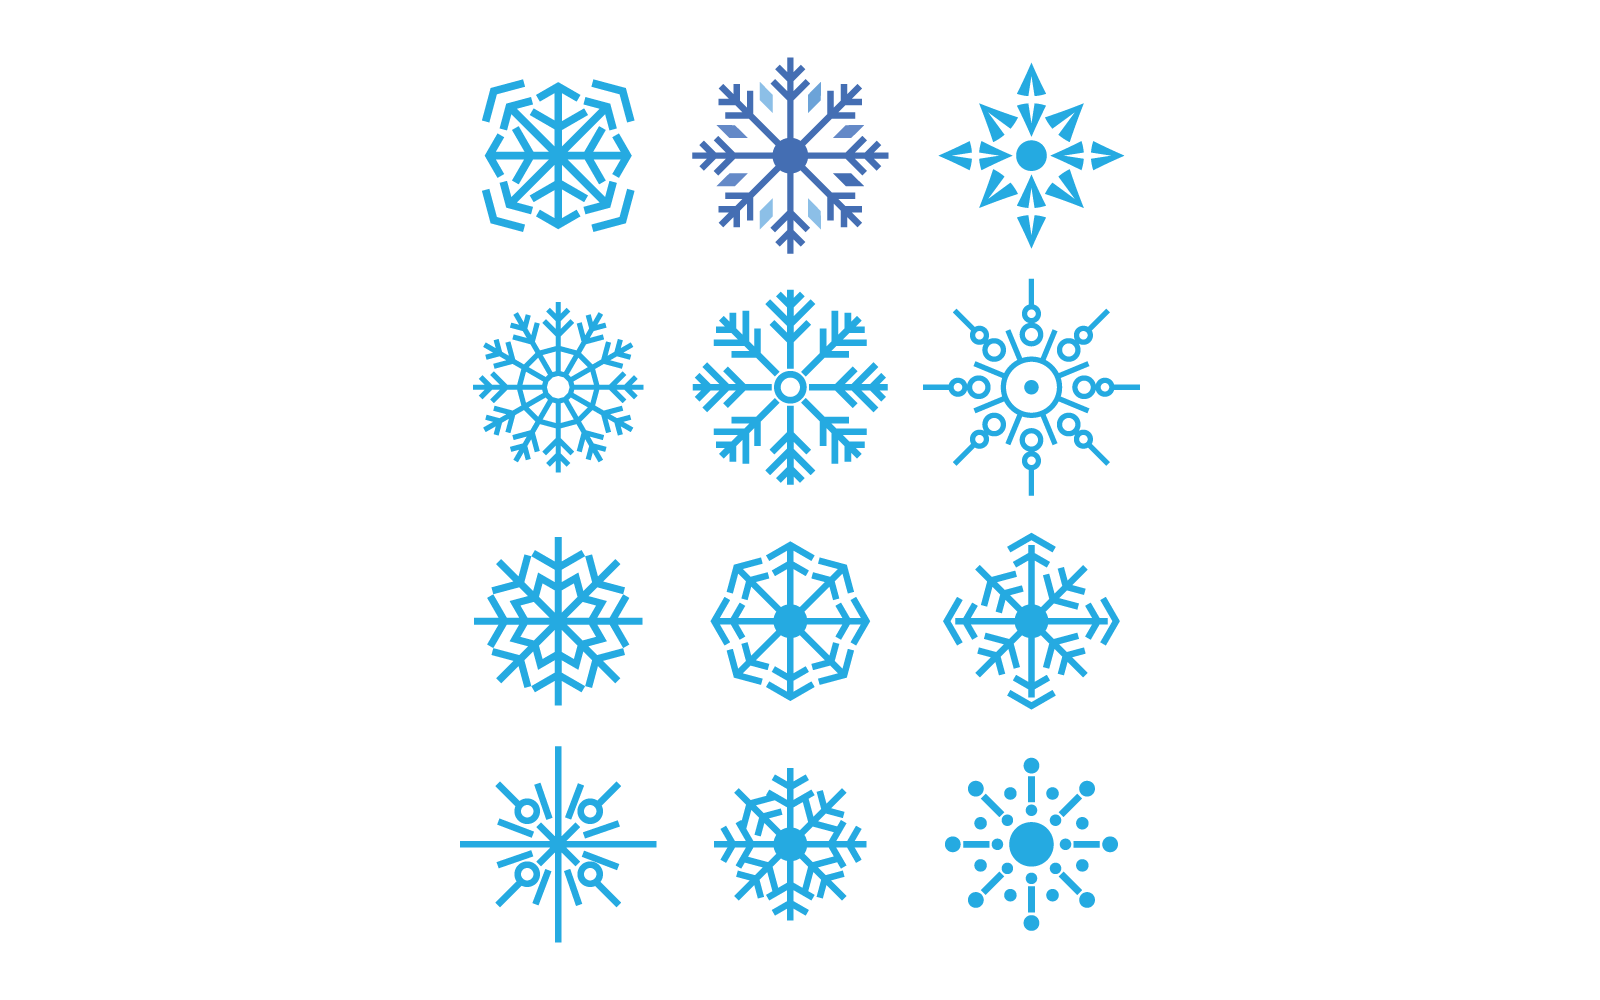 Snowflakes ilustration vector design template